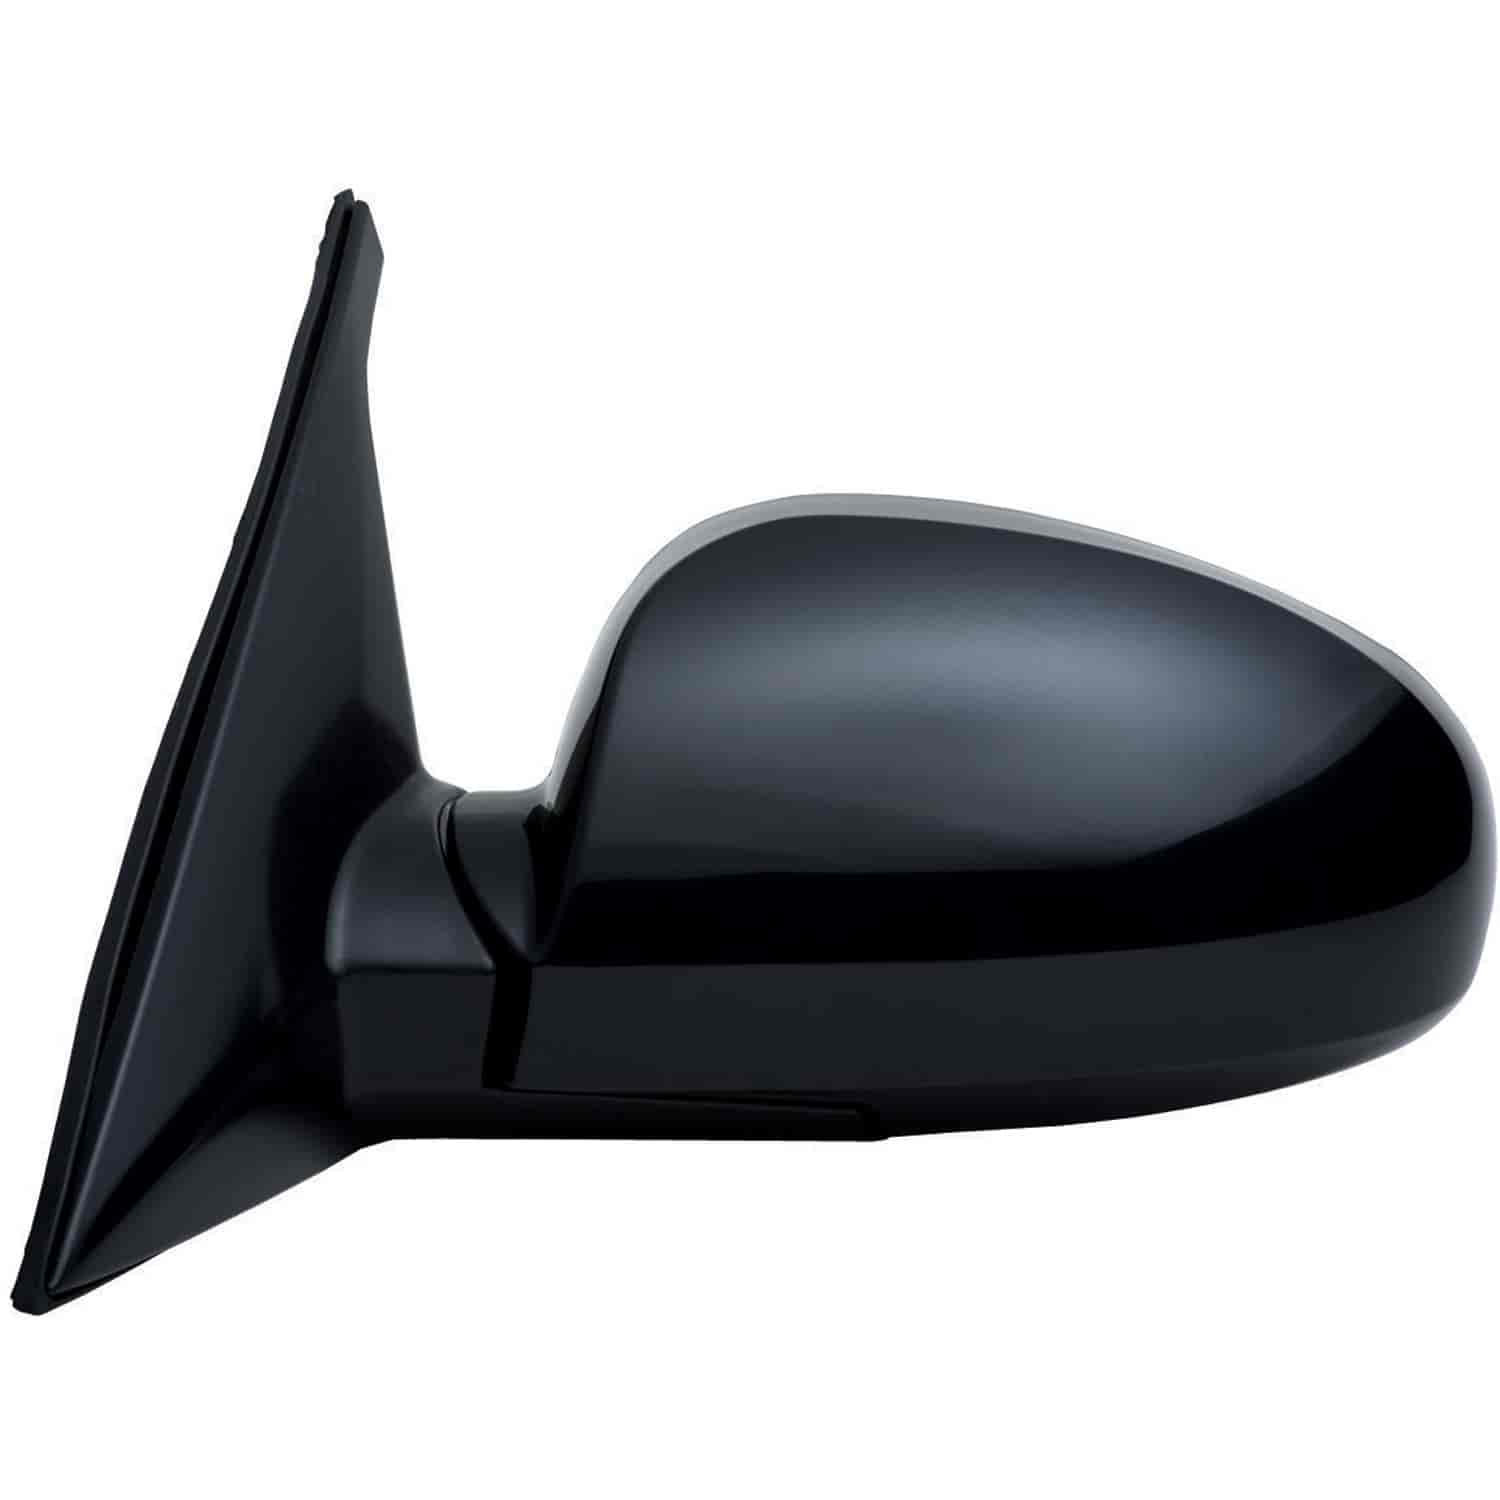 OEM Style Replacement mirror for 01-06 Kia Optima LX model driver side mirror tested to fit and func